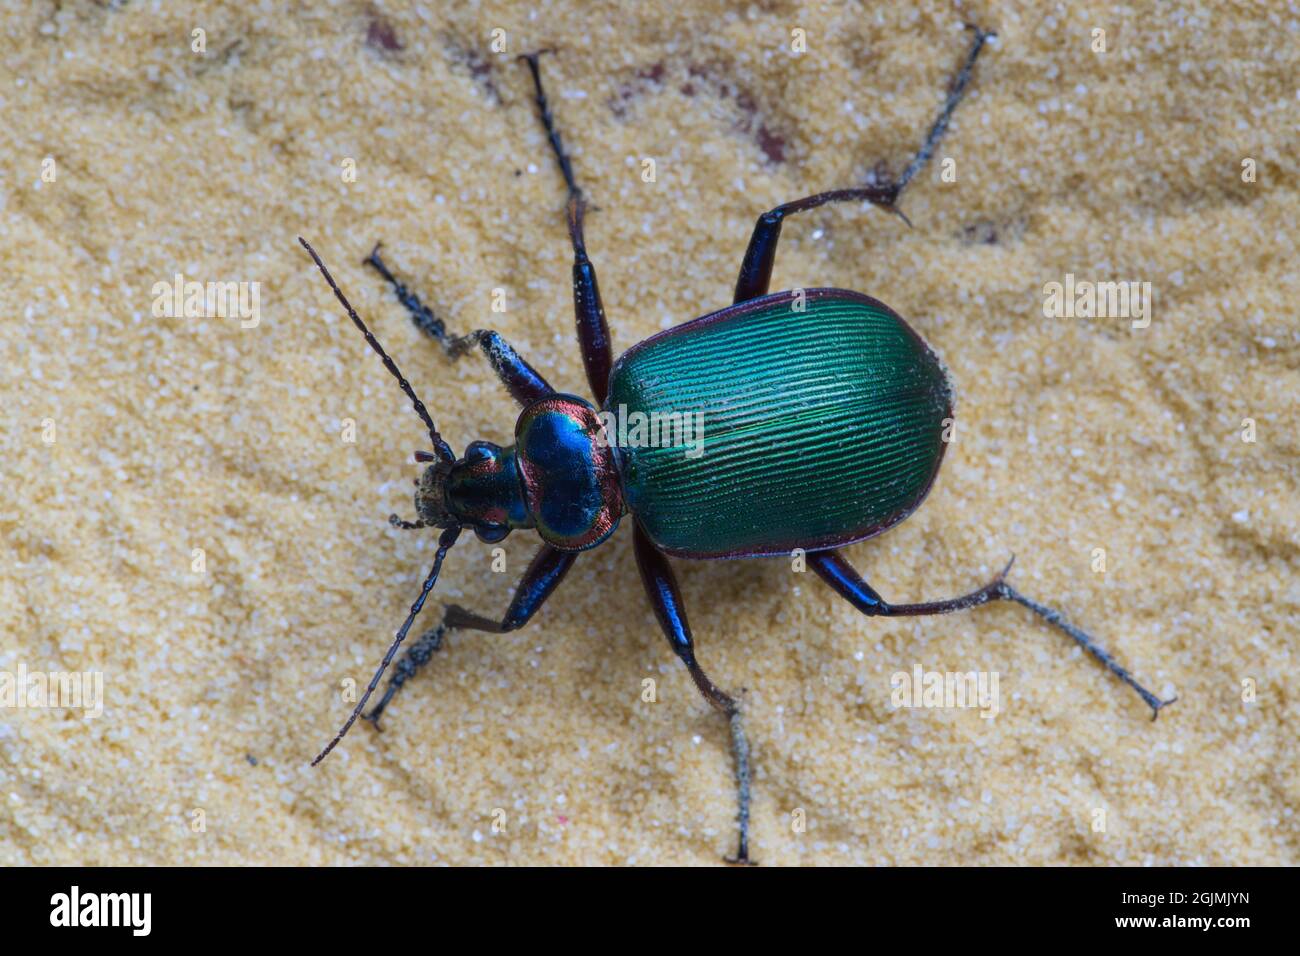 Forest Caterpillar Hunter ground beetle (Calosoma sycophanta) in a patch of fine sand. Species is native to Europe. Stock Photo